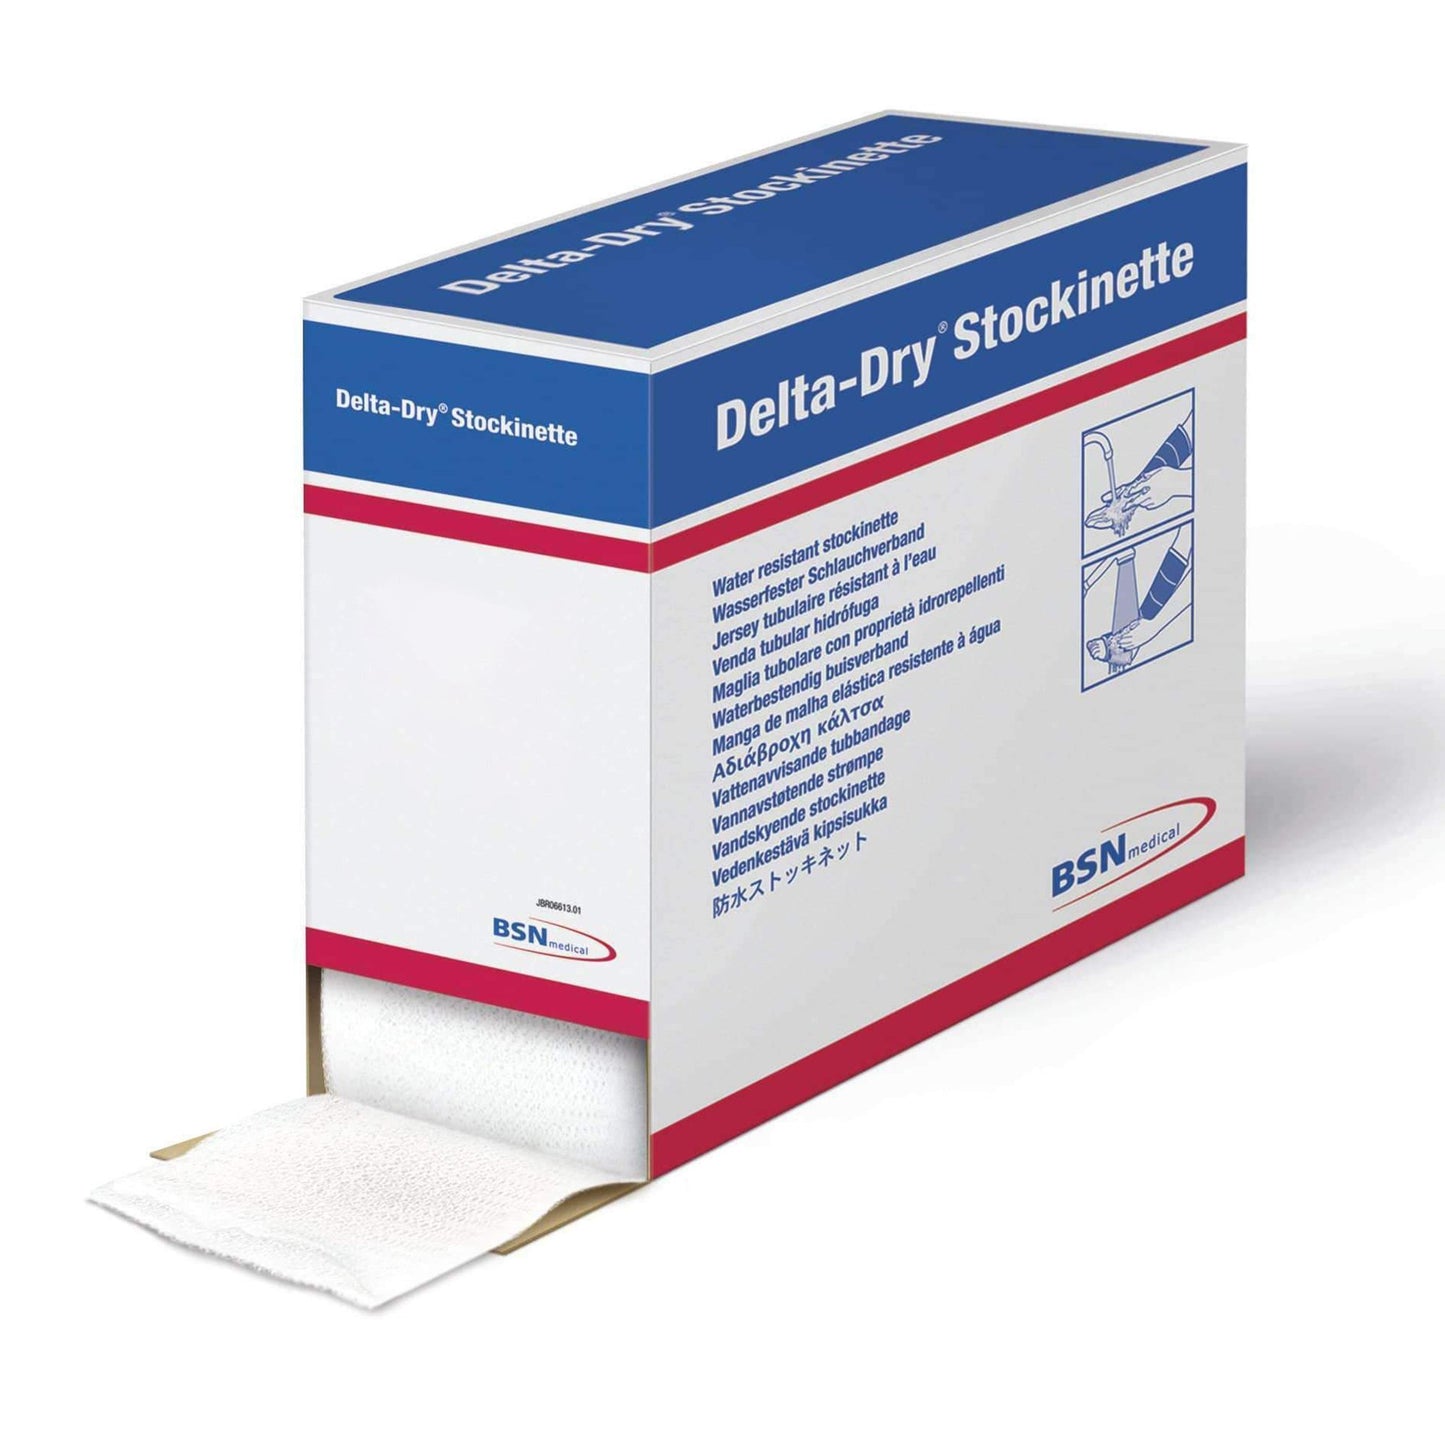 Delta-Dry® Stockinette, Sold As 2/Case Bsn 7456403